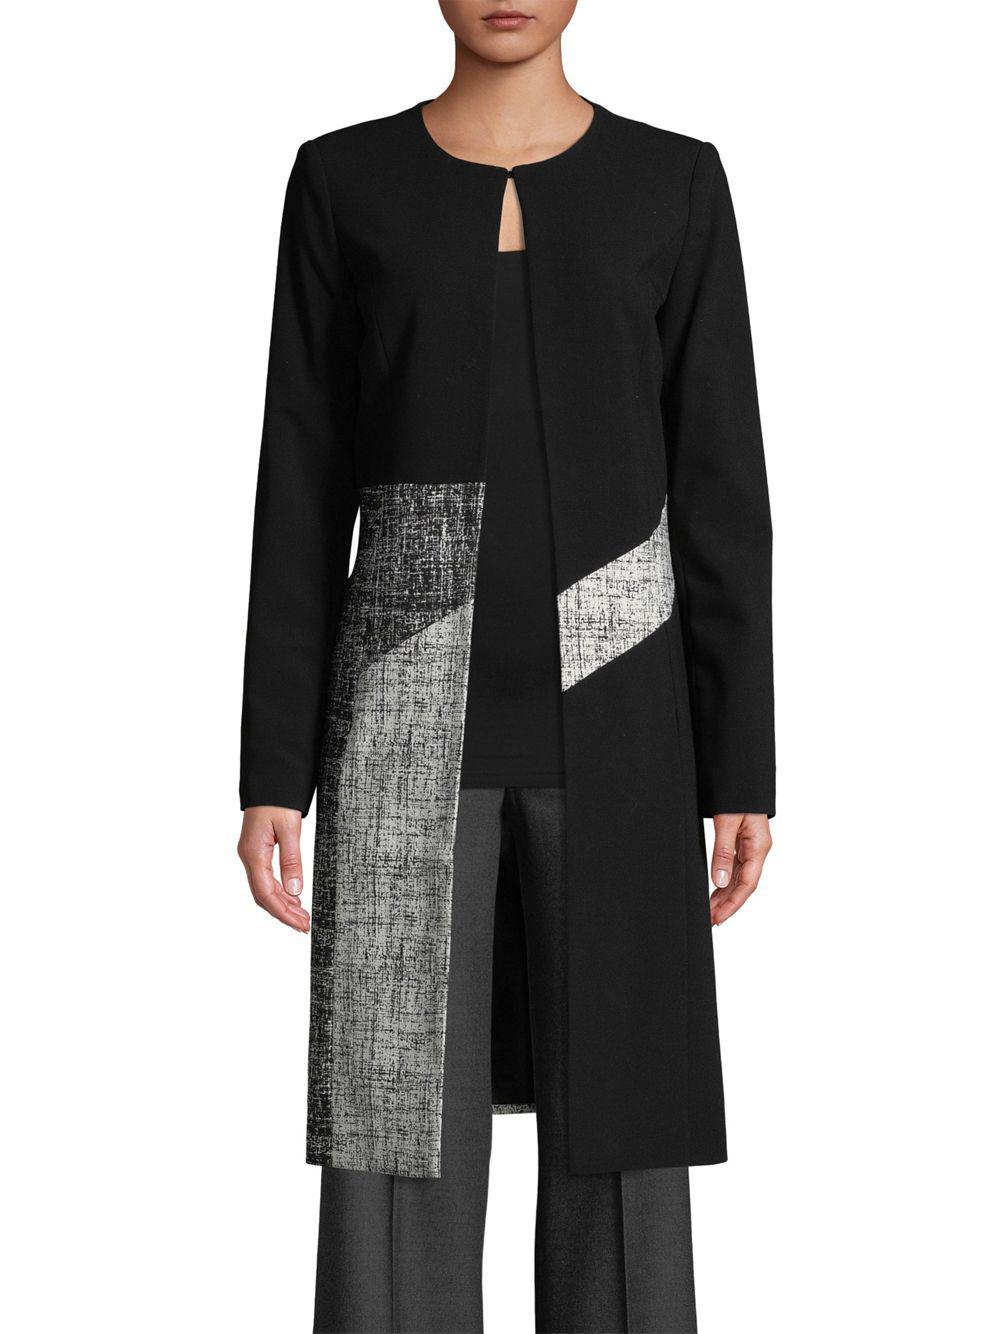 Calvin Klein Synthetic Colorblock Topper Jacket in Black - Lyst